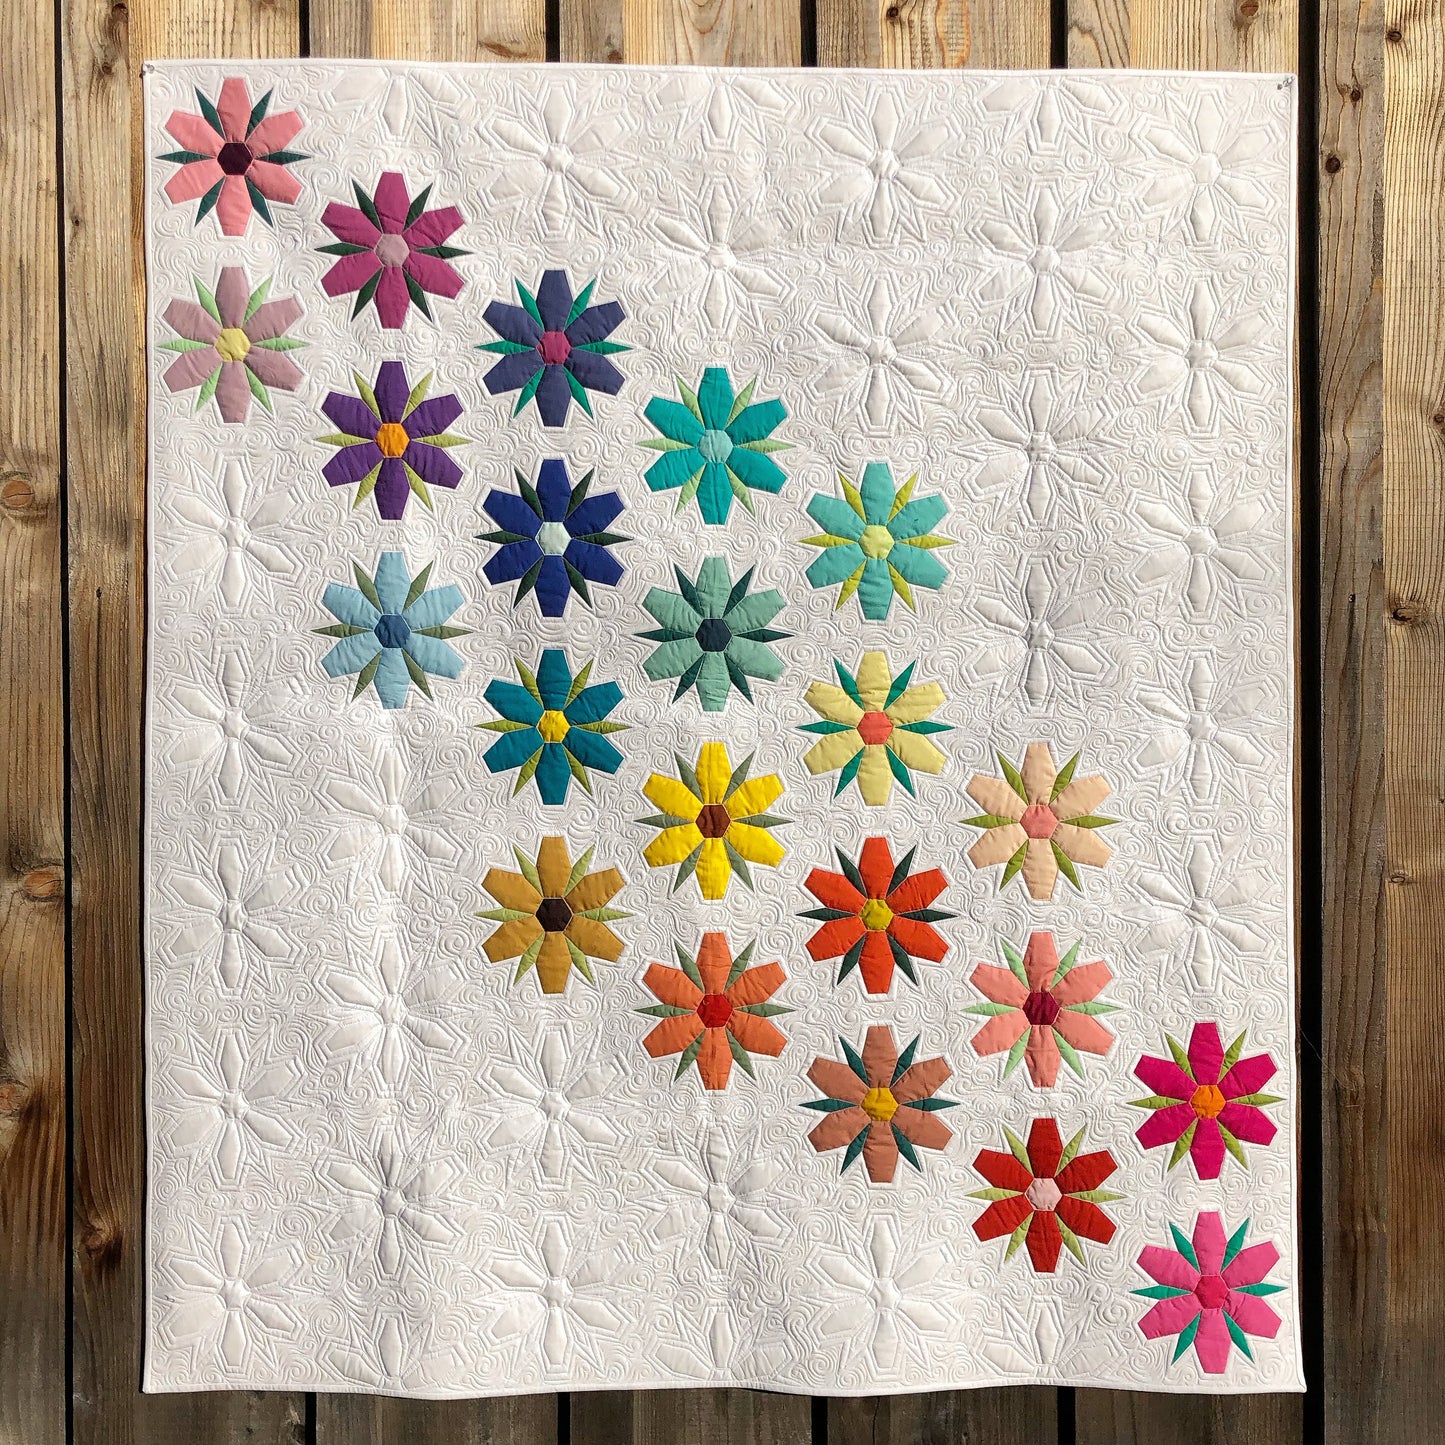 Flowermania English Paper Piecing Full Quilt (Papers Only)